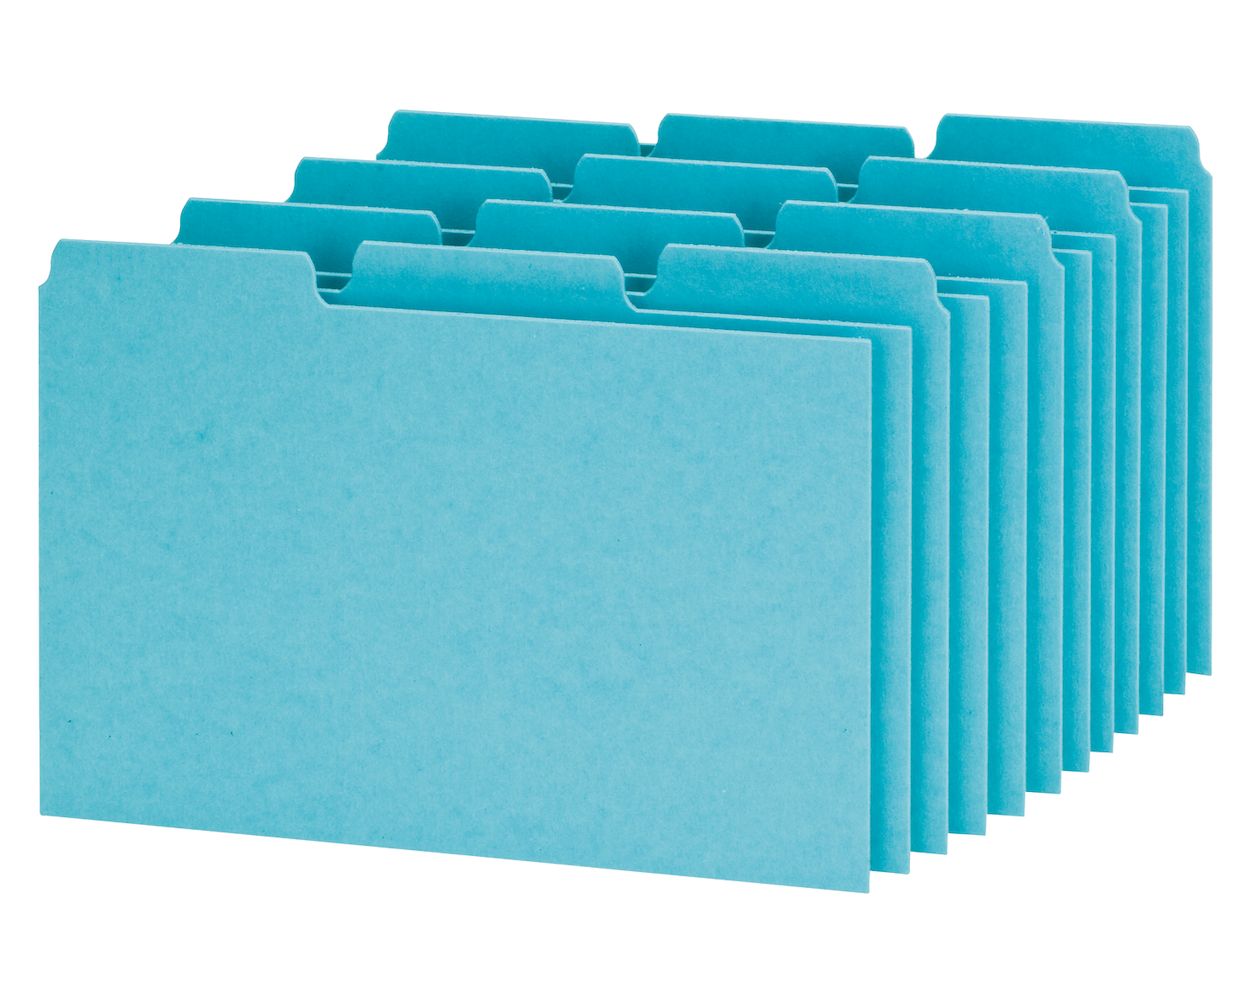 Oxford Index Card Guides with Blank Tabs, 22 x 22, 22/22 Cut Tabs In 4X6 Note Card Template